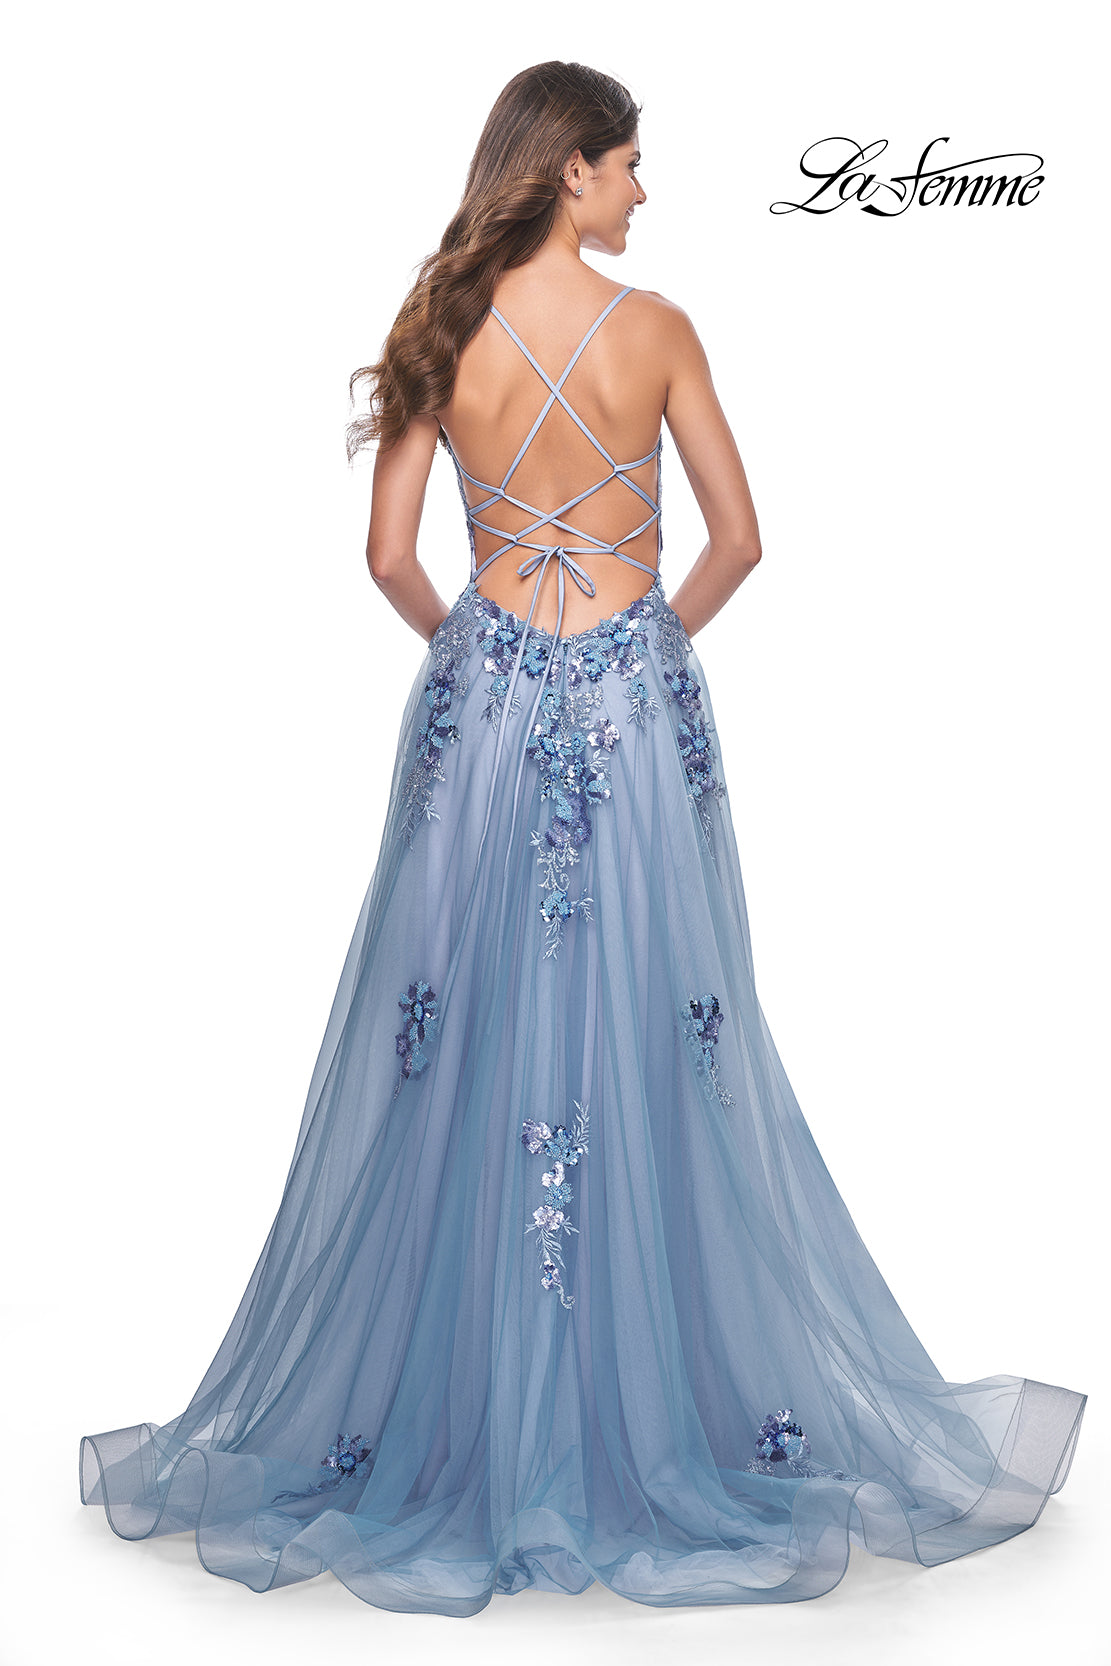 Beaded Lace Applique Gown with Illusion Bodice